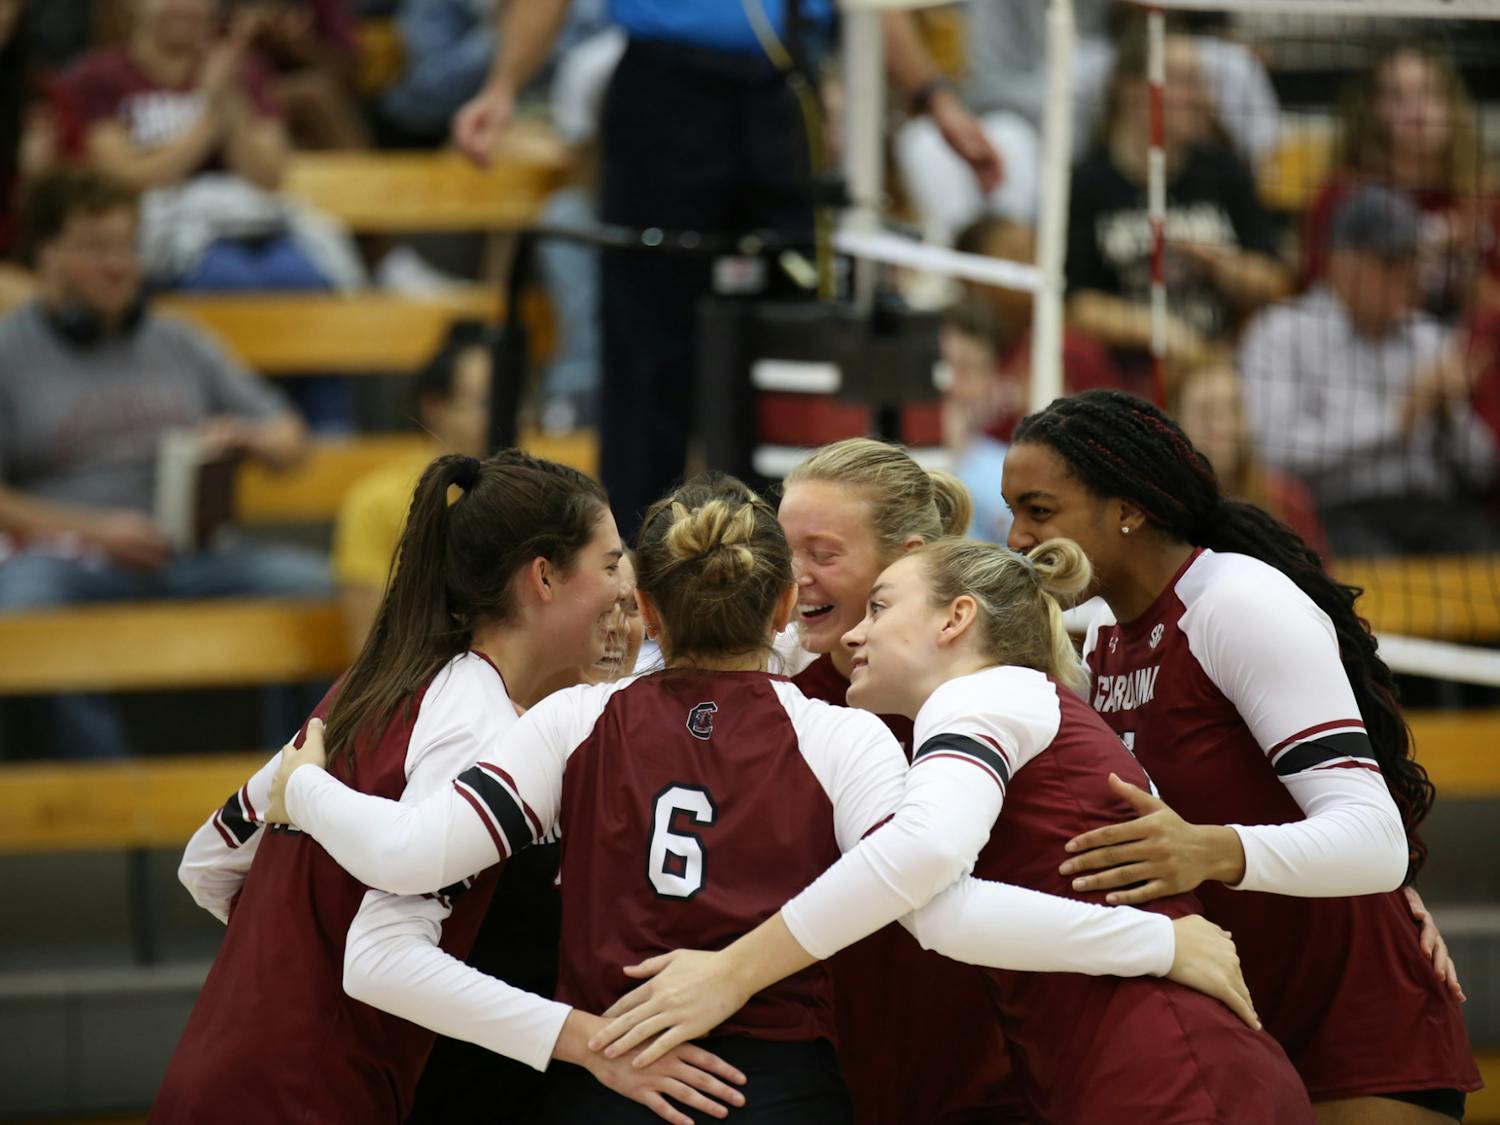 The Gamecocks huddling up in celebration of a point against the Tigers in their second matchup of their weekend series on Oct. 2, 2022. After a comeback first game, South Carolina closed its second game with a straight-set win.&nbsp;